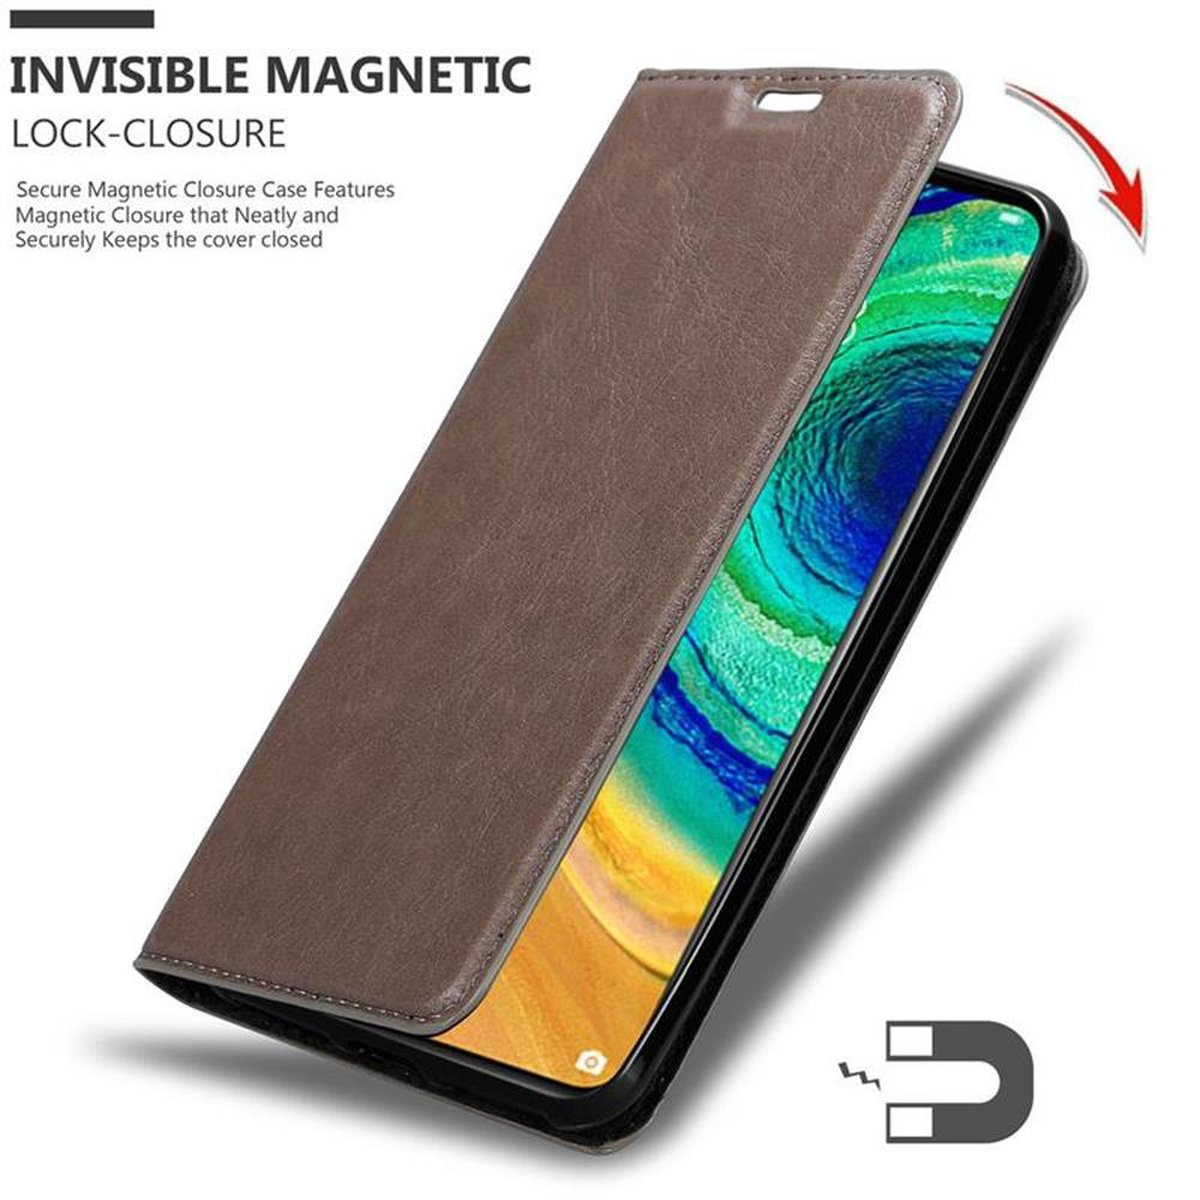 BRAUN Book Invisible Huawei, Bookcover, 30, Hülle MATE Magnet, CADORABO KAFFEE